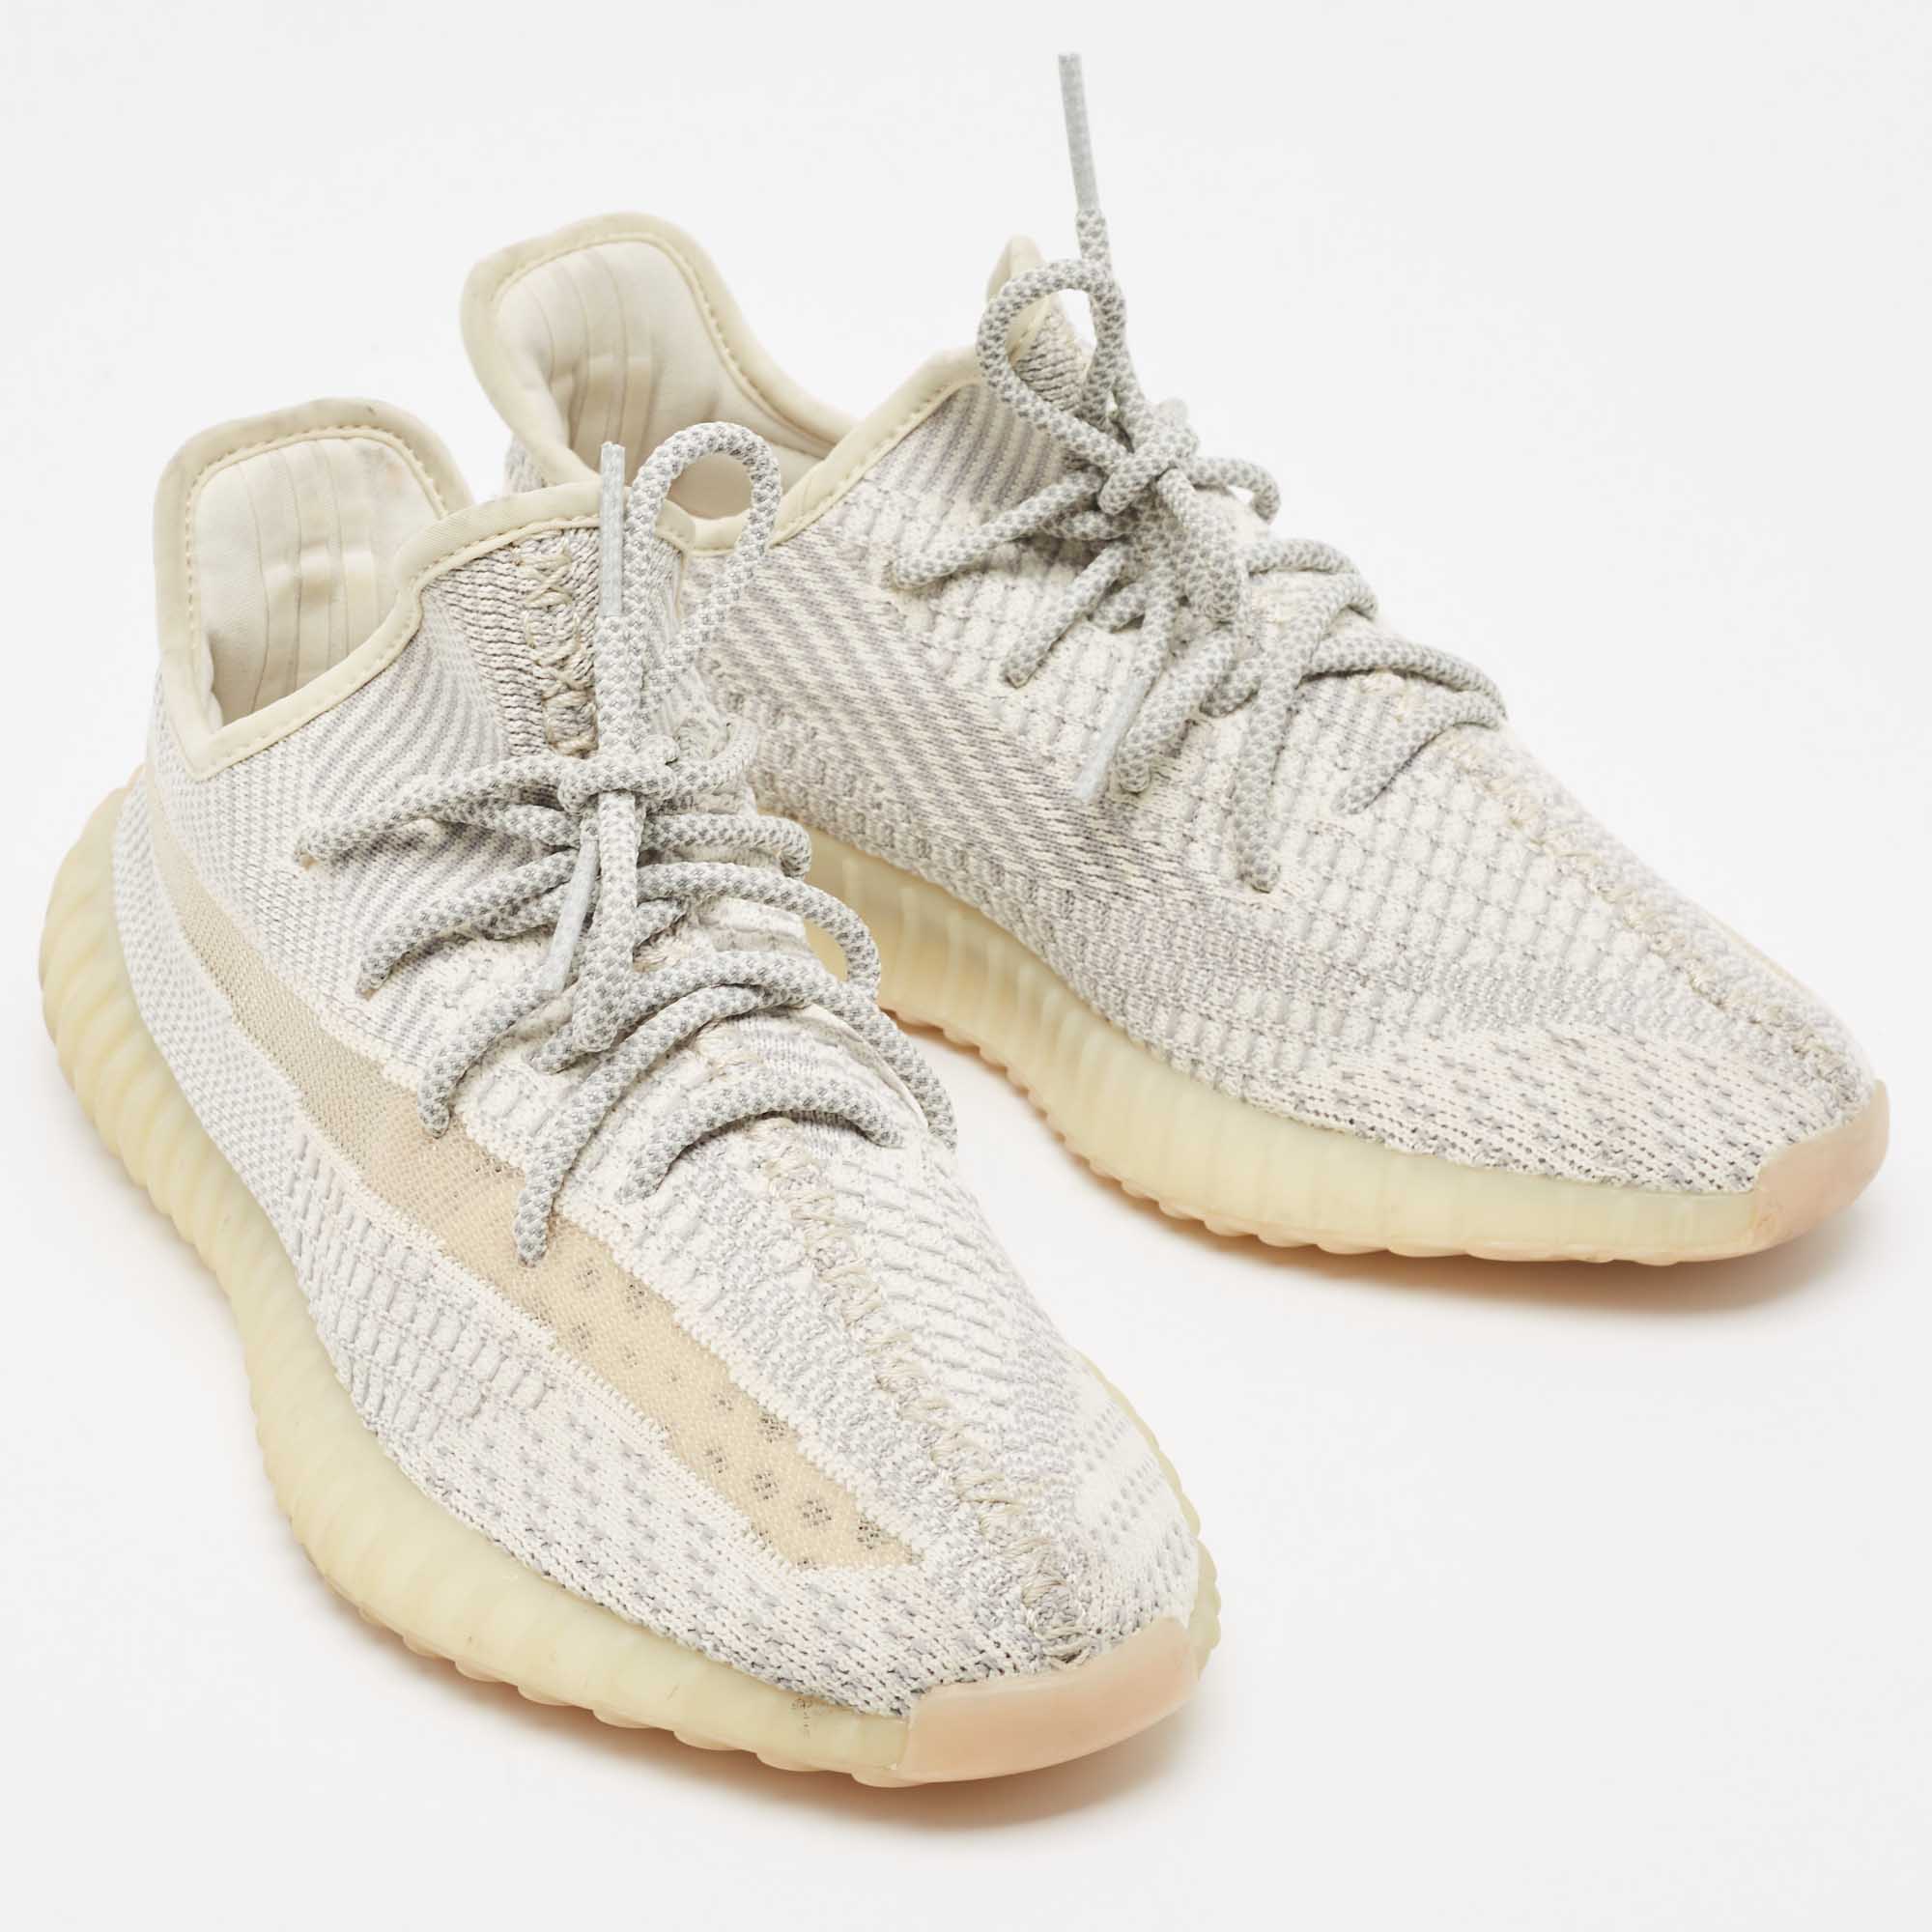 Yeezy X Adidas Two Tone Knit Fabric Boost 350 V2 Lundmark Sneakers Size 41 1/3